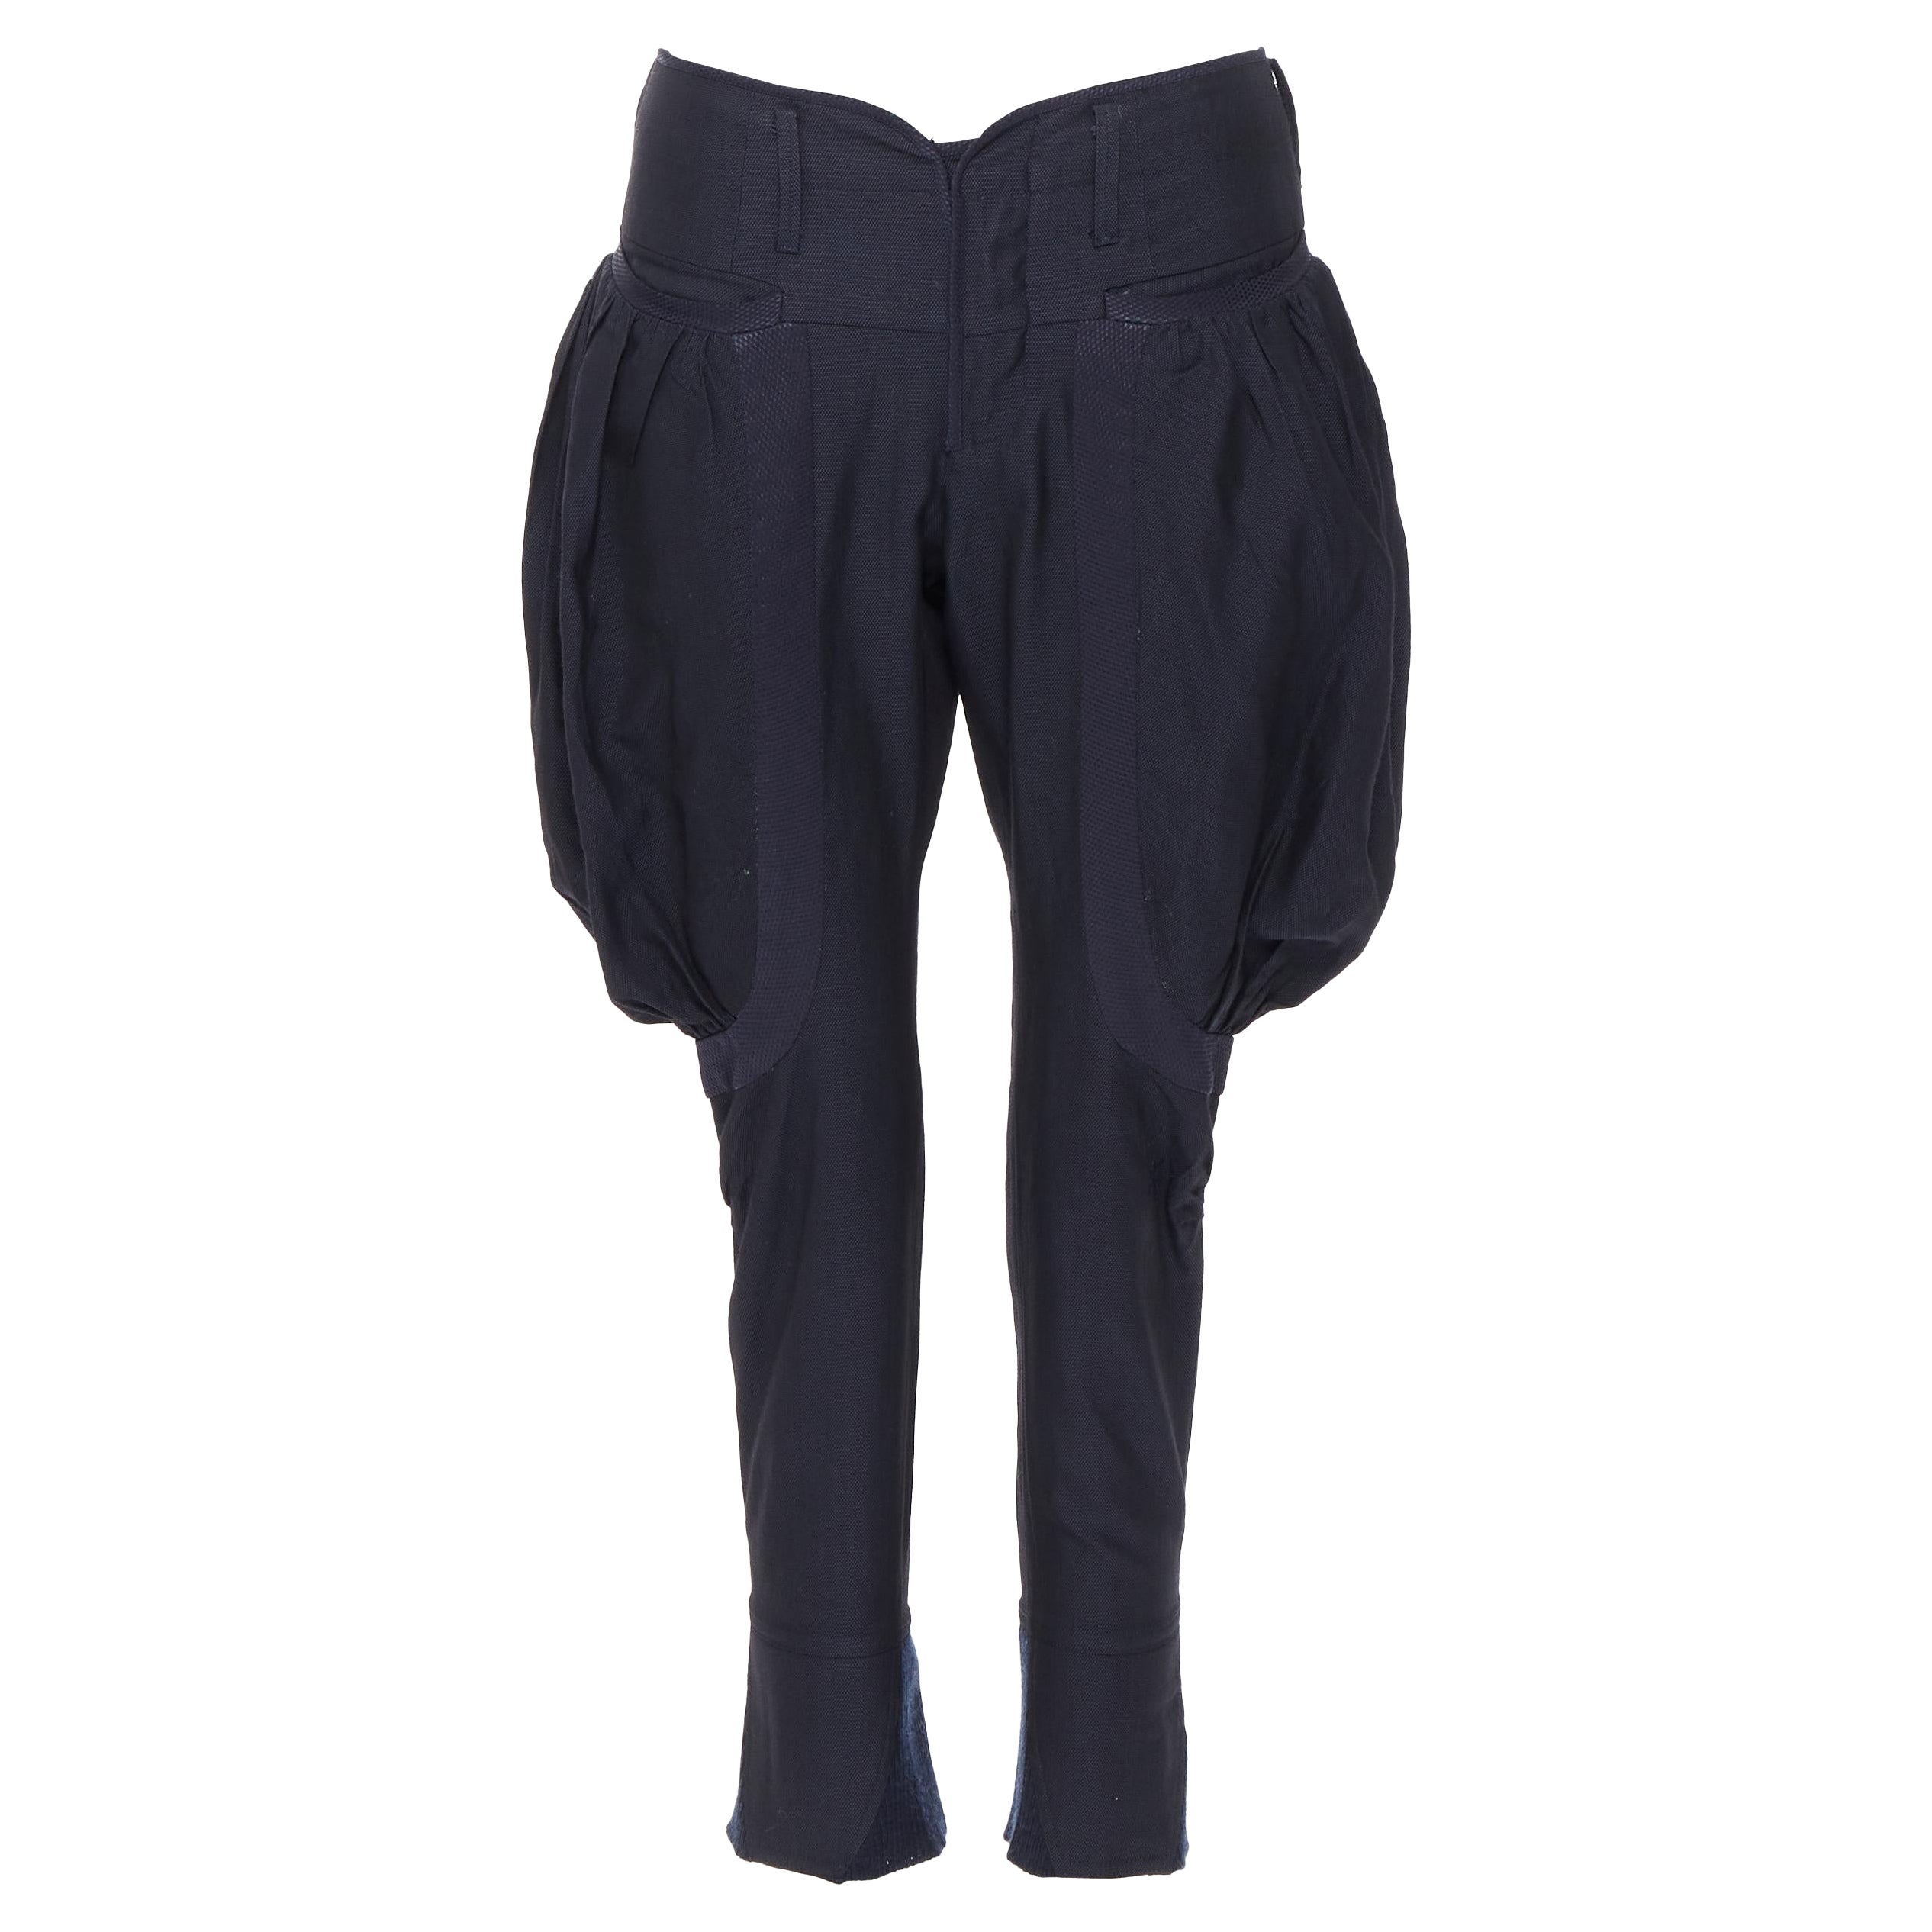 UNDERCOVER navy wool silk pleated exaggerated pockets jodphur riding pants M